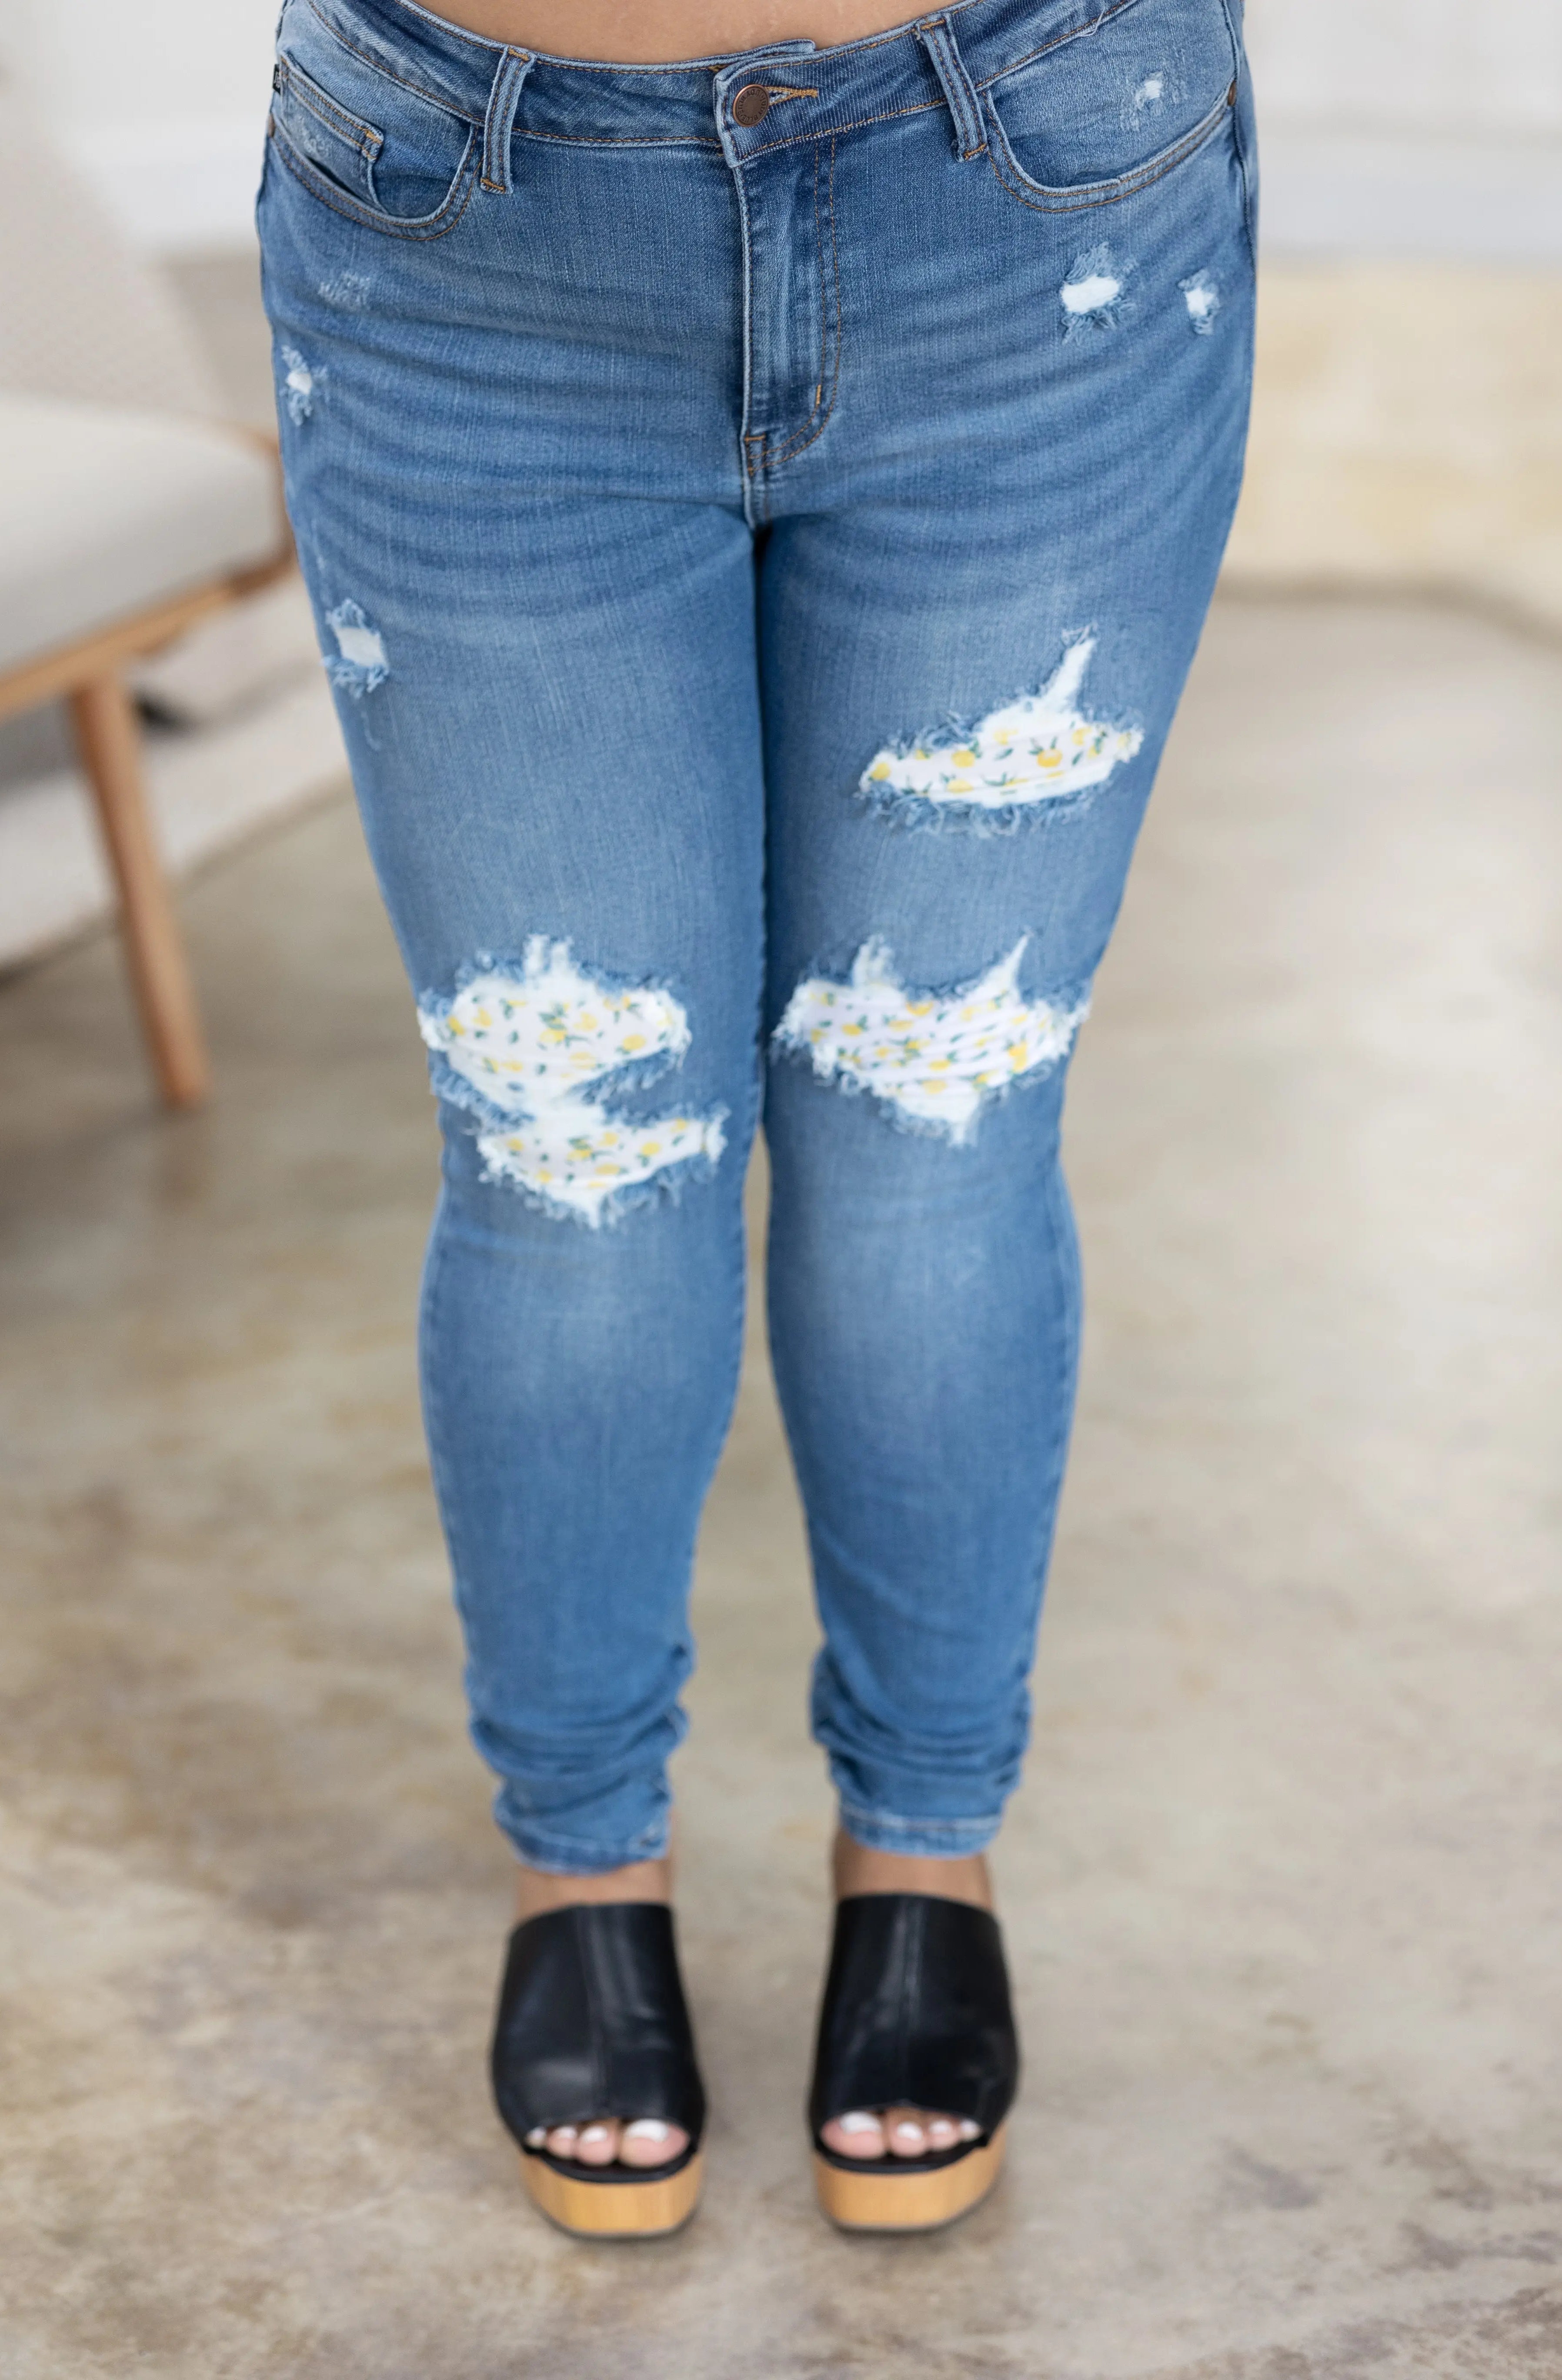 Lemon Drops Judy Blue Patched Skinnies JB Boutique Simplified